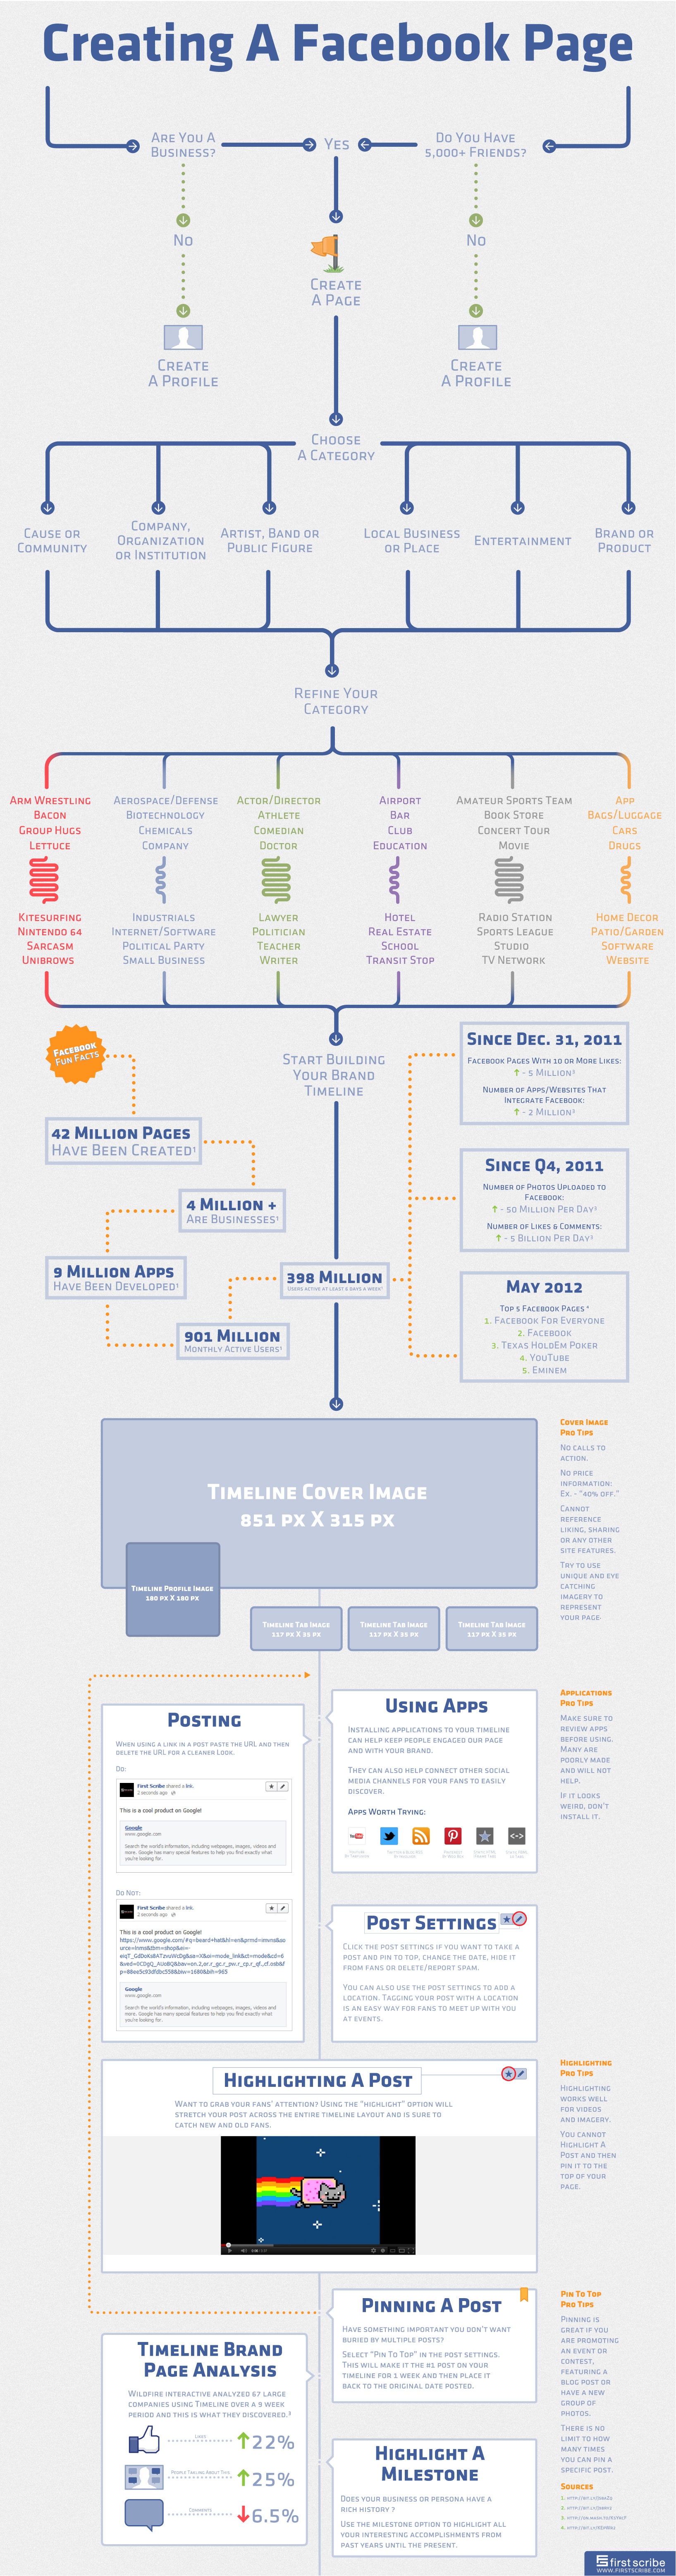 Ultimate Guide To Creating A Facebook Page [Flowchart]